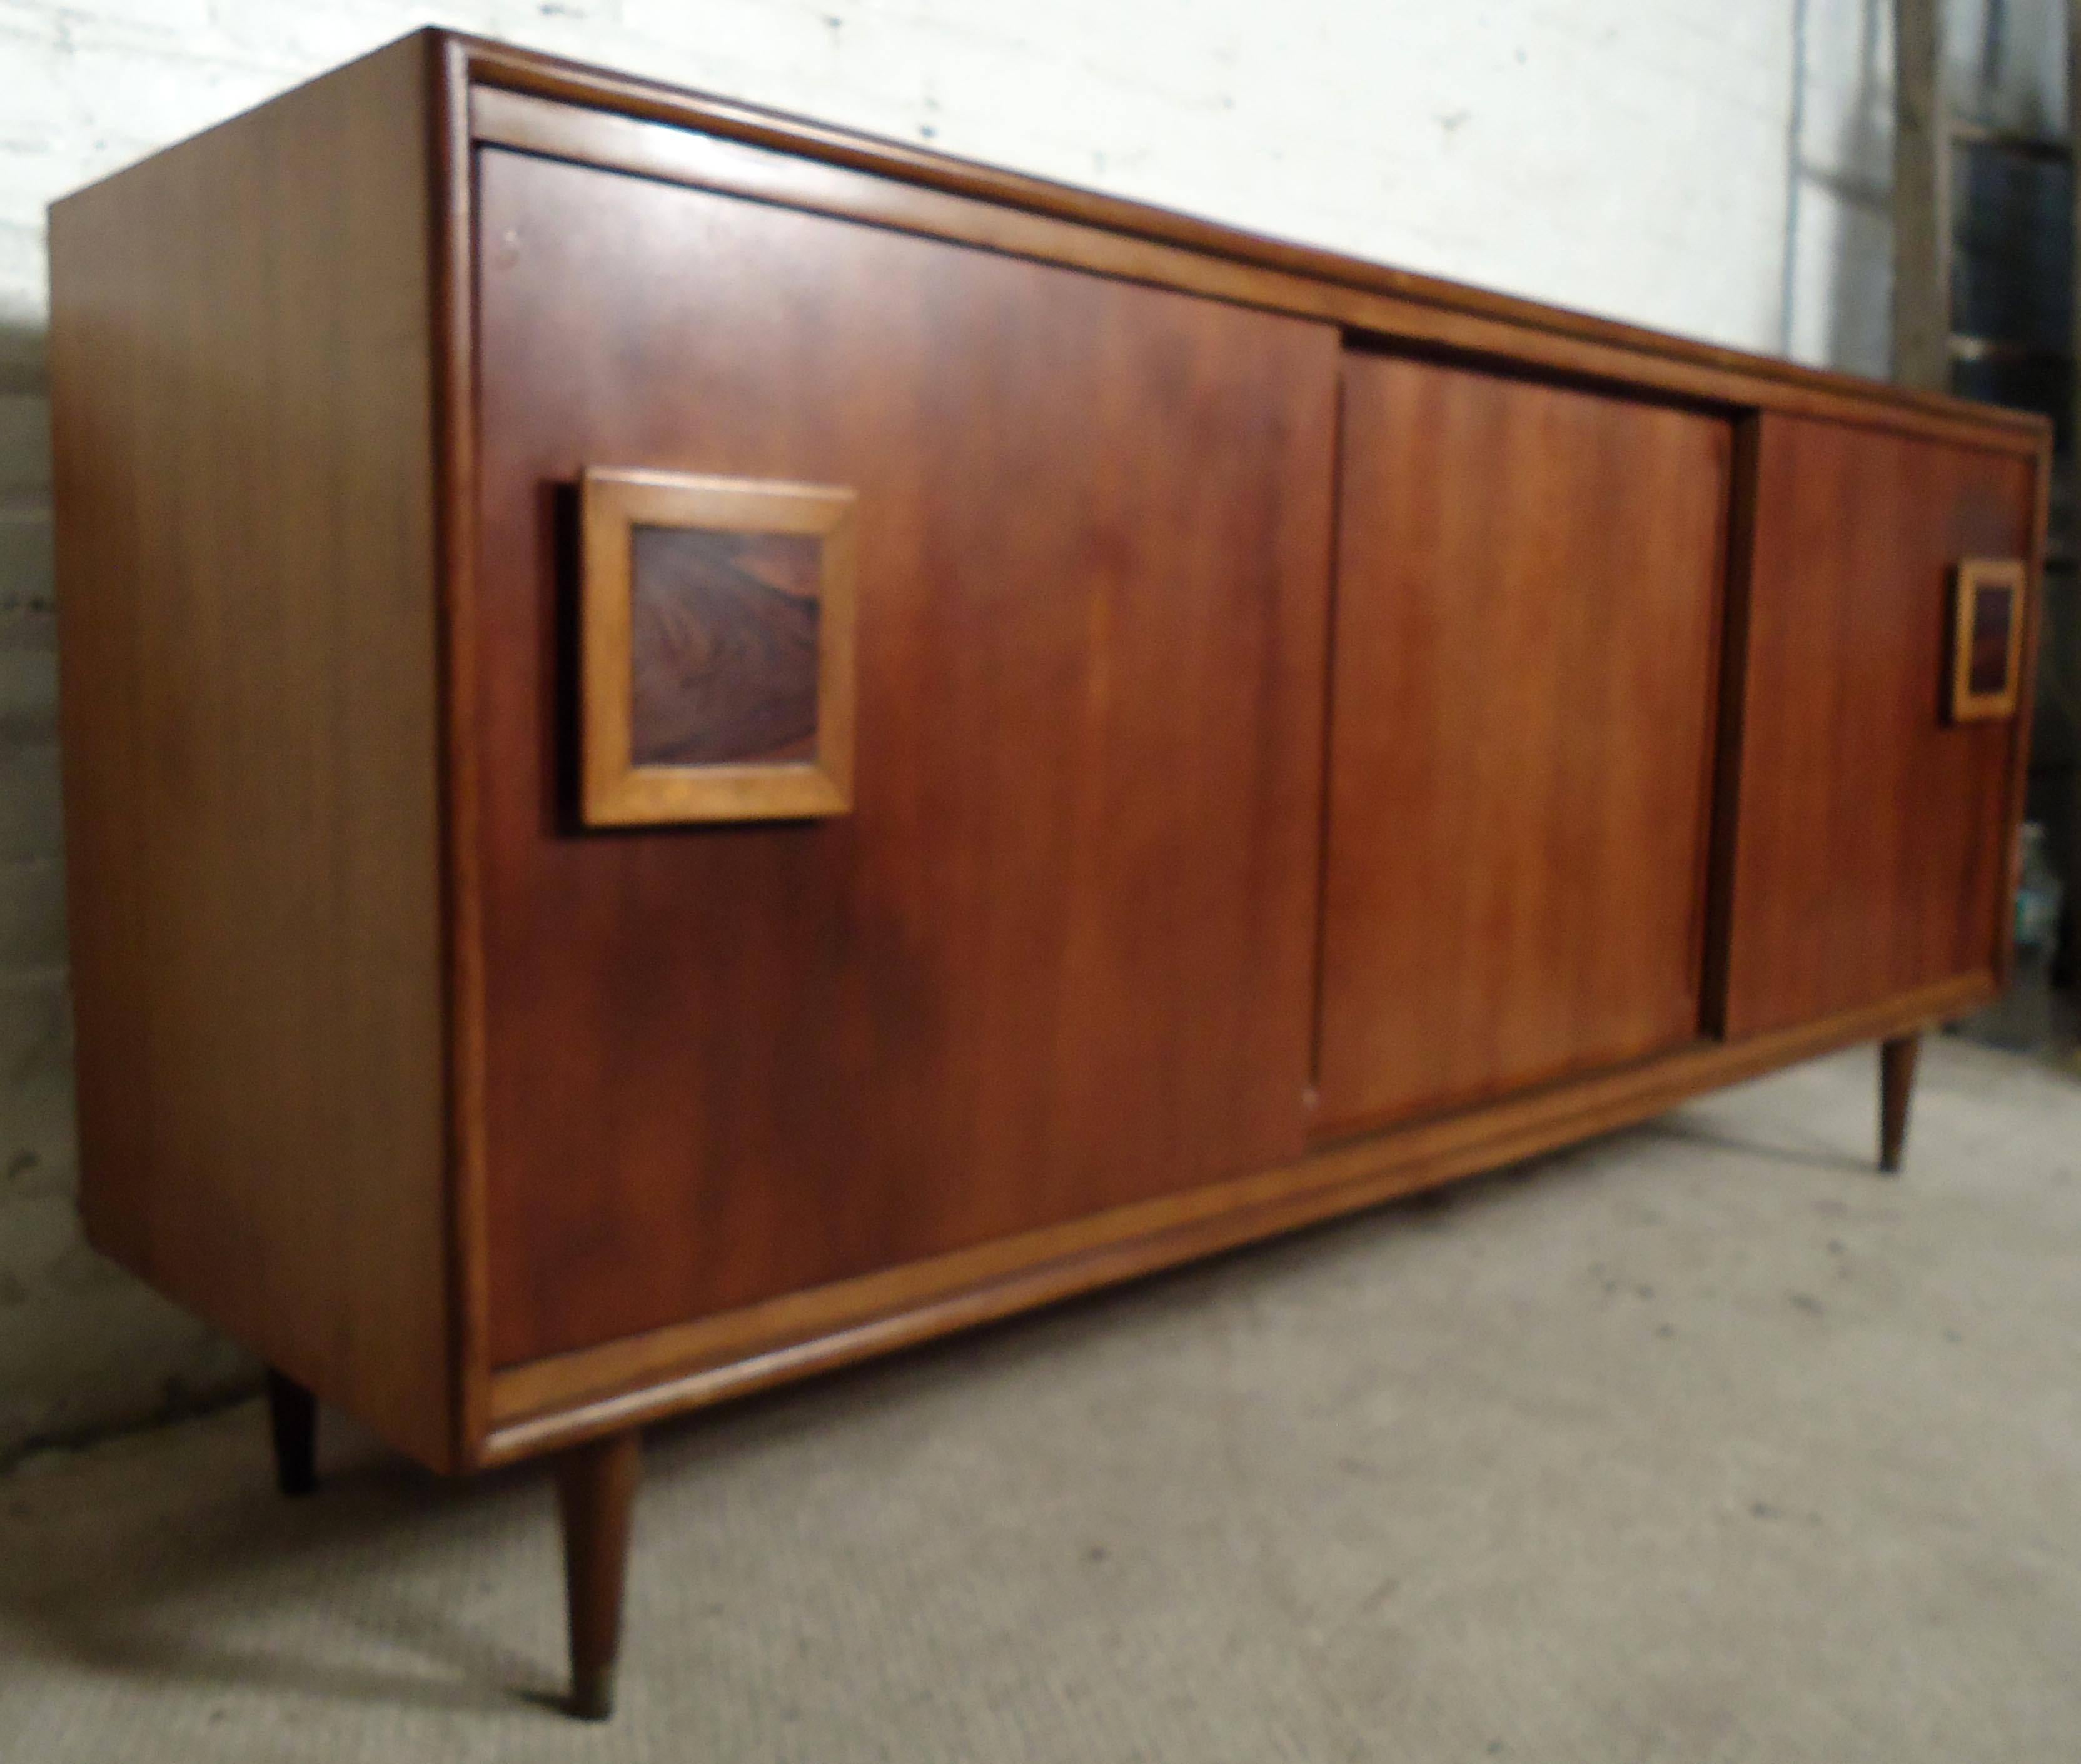 Vintage-modern server, features walnut top, teak front, and sculpted rosewood handles with oak accenting. Sliding doors reveal both drawers and adjustable shelving.

Please confirm item location NY or NJ with dealer.